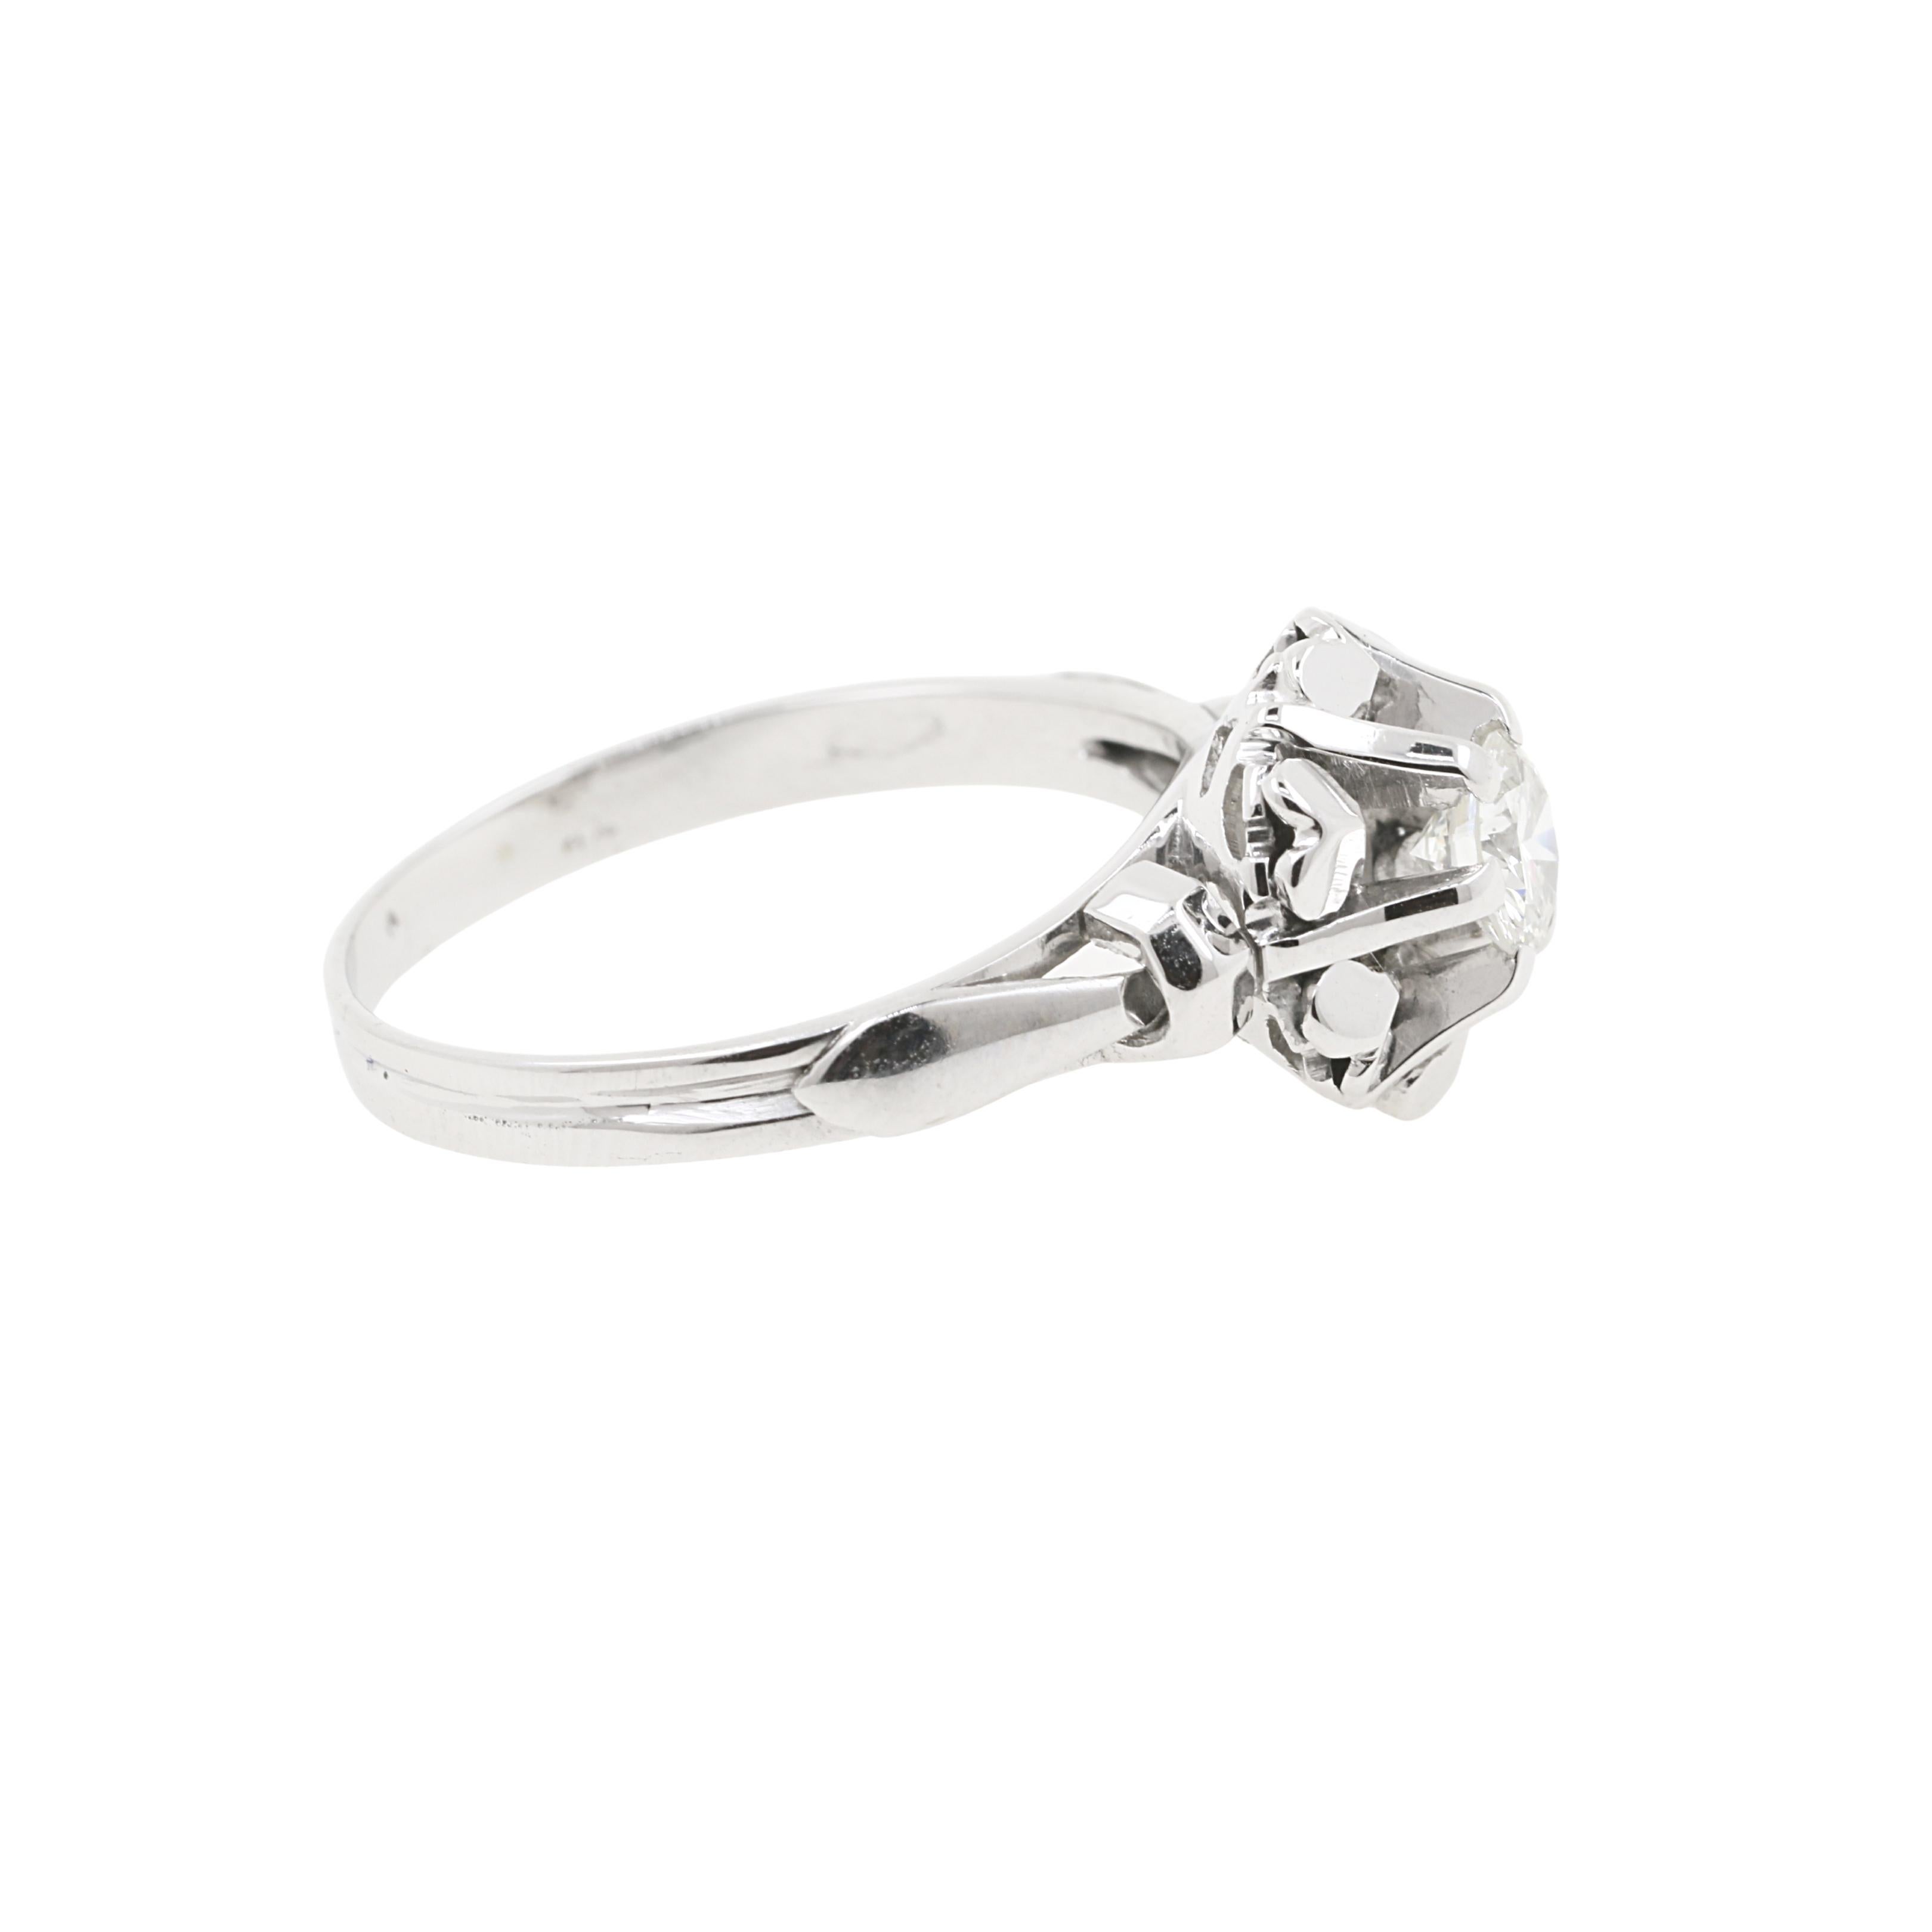 Contemporary 0.20 Carat Diamond Engagement Ring on 18 Karat White Gold For Sale